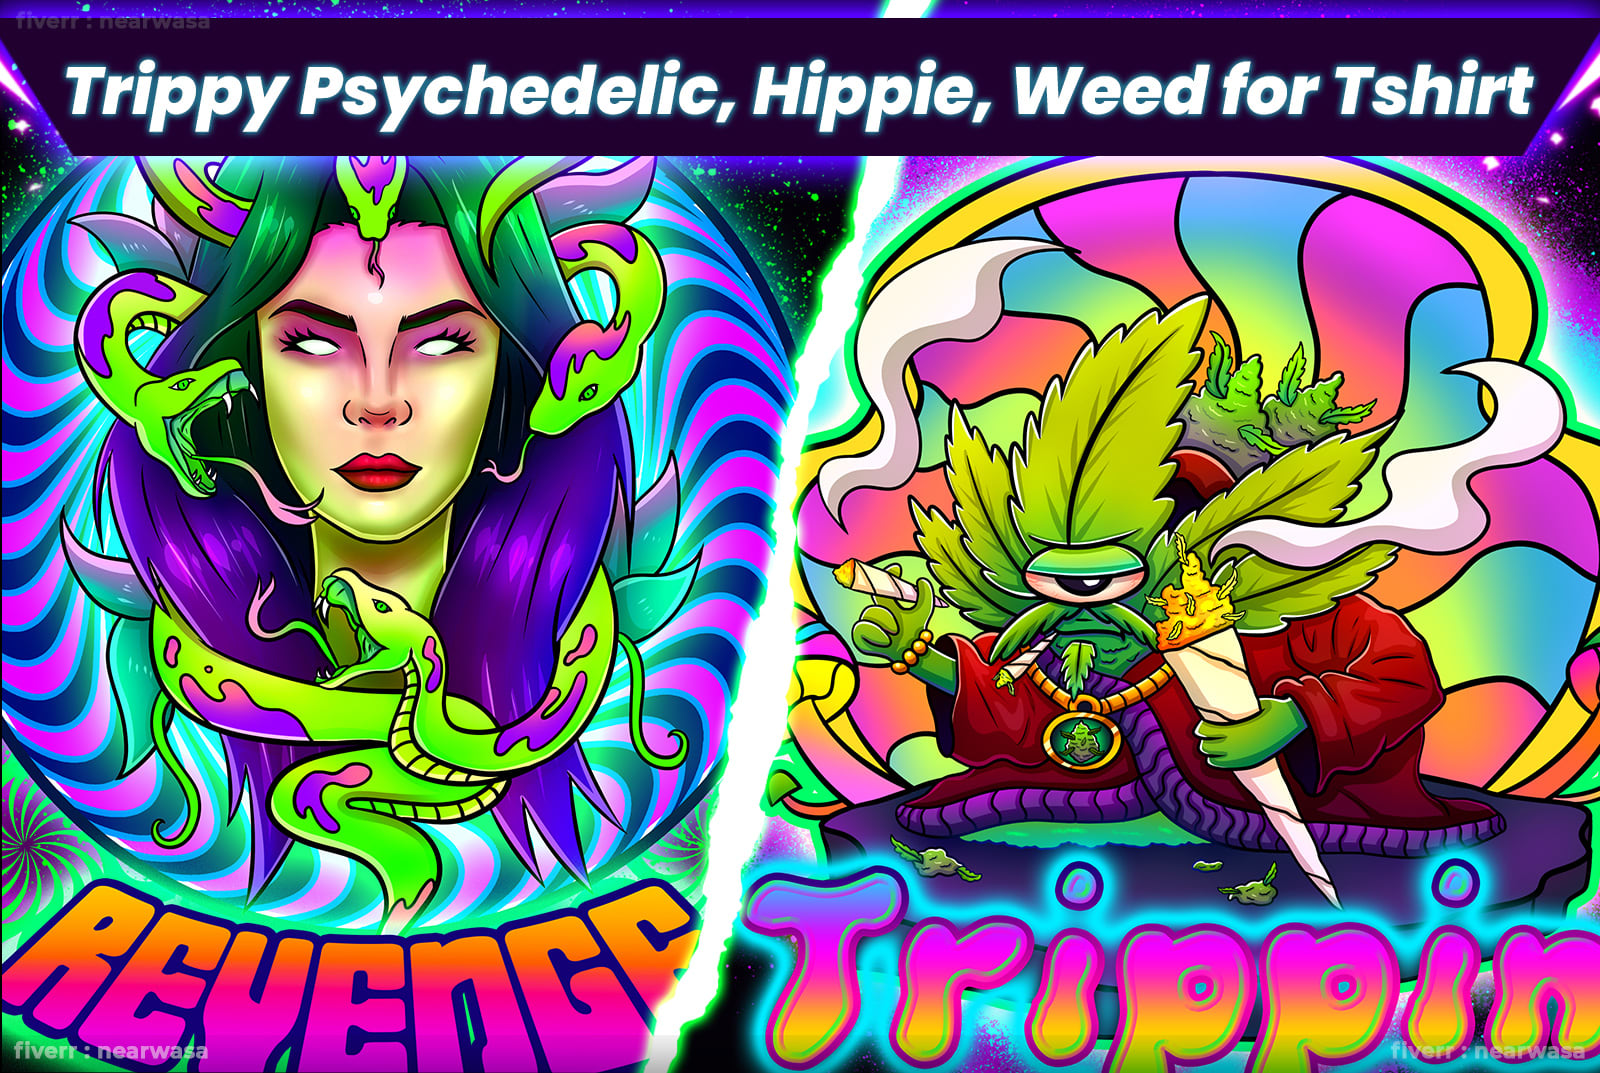 Do trippy psychedelic hippie weed for t shirt design by Nearwasa | Fiverr